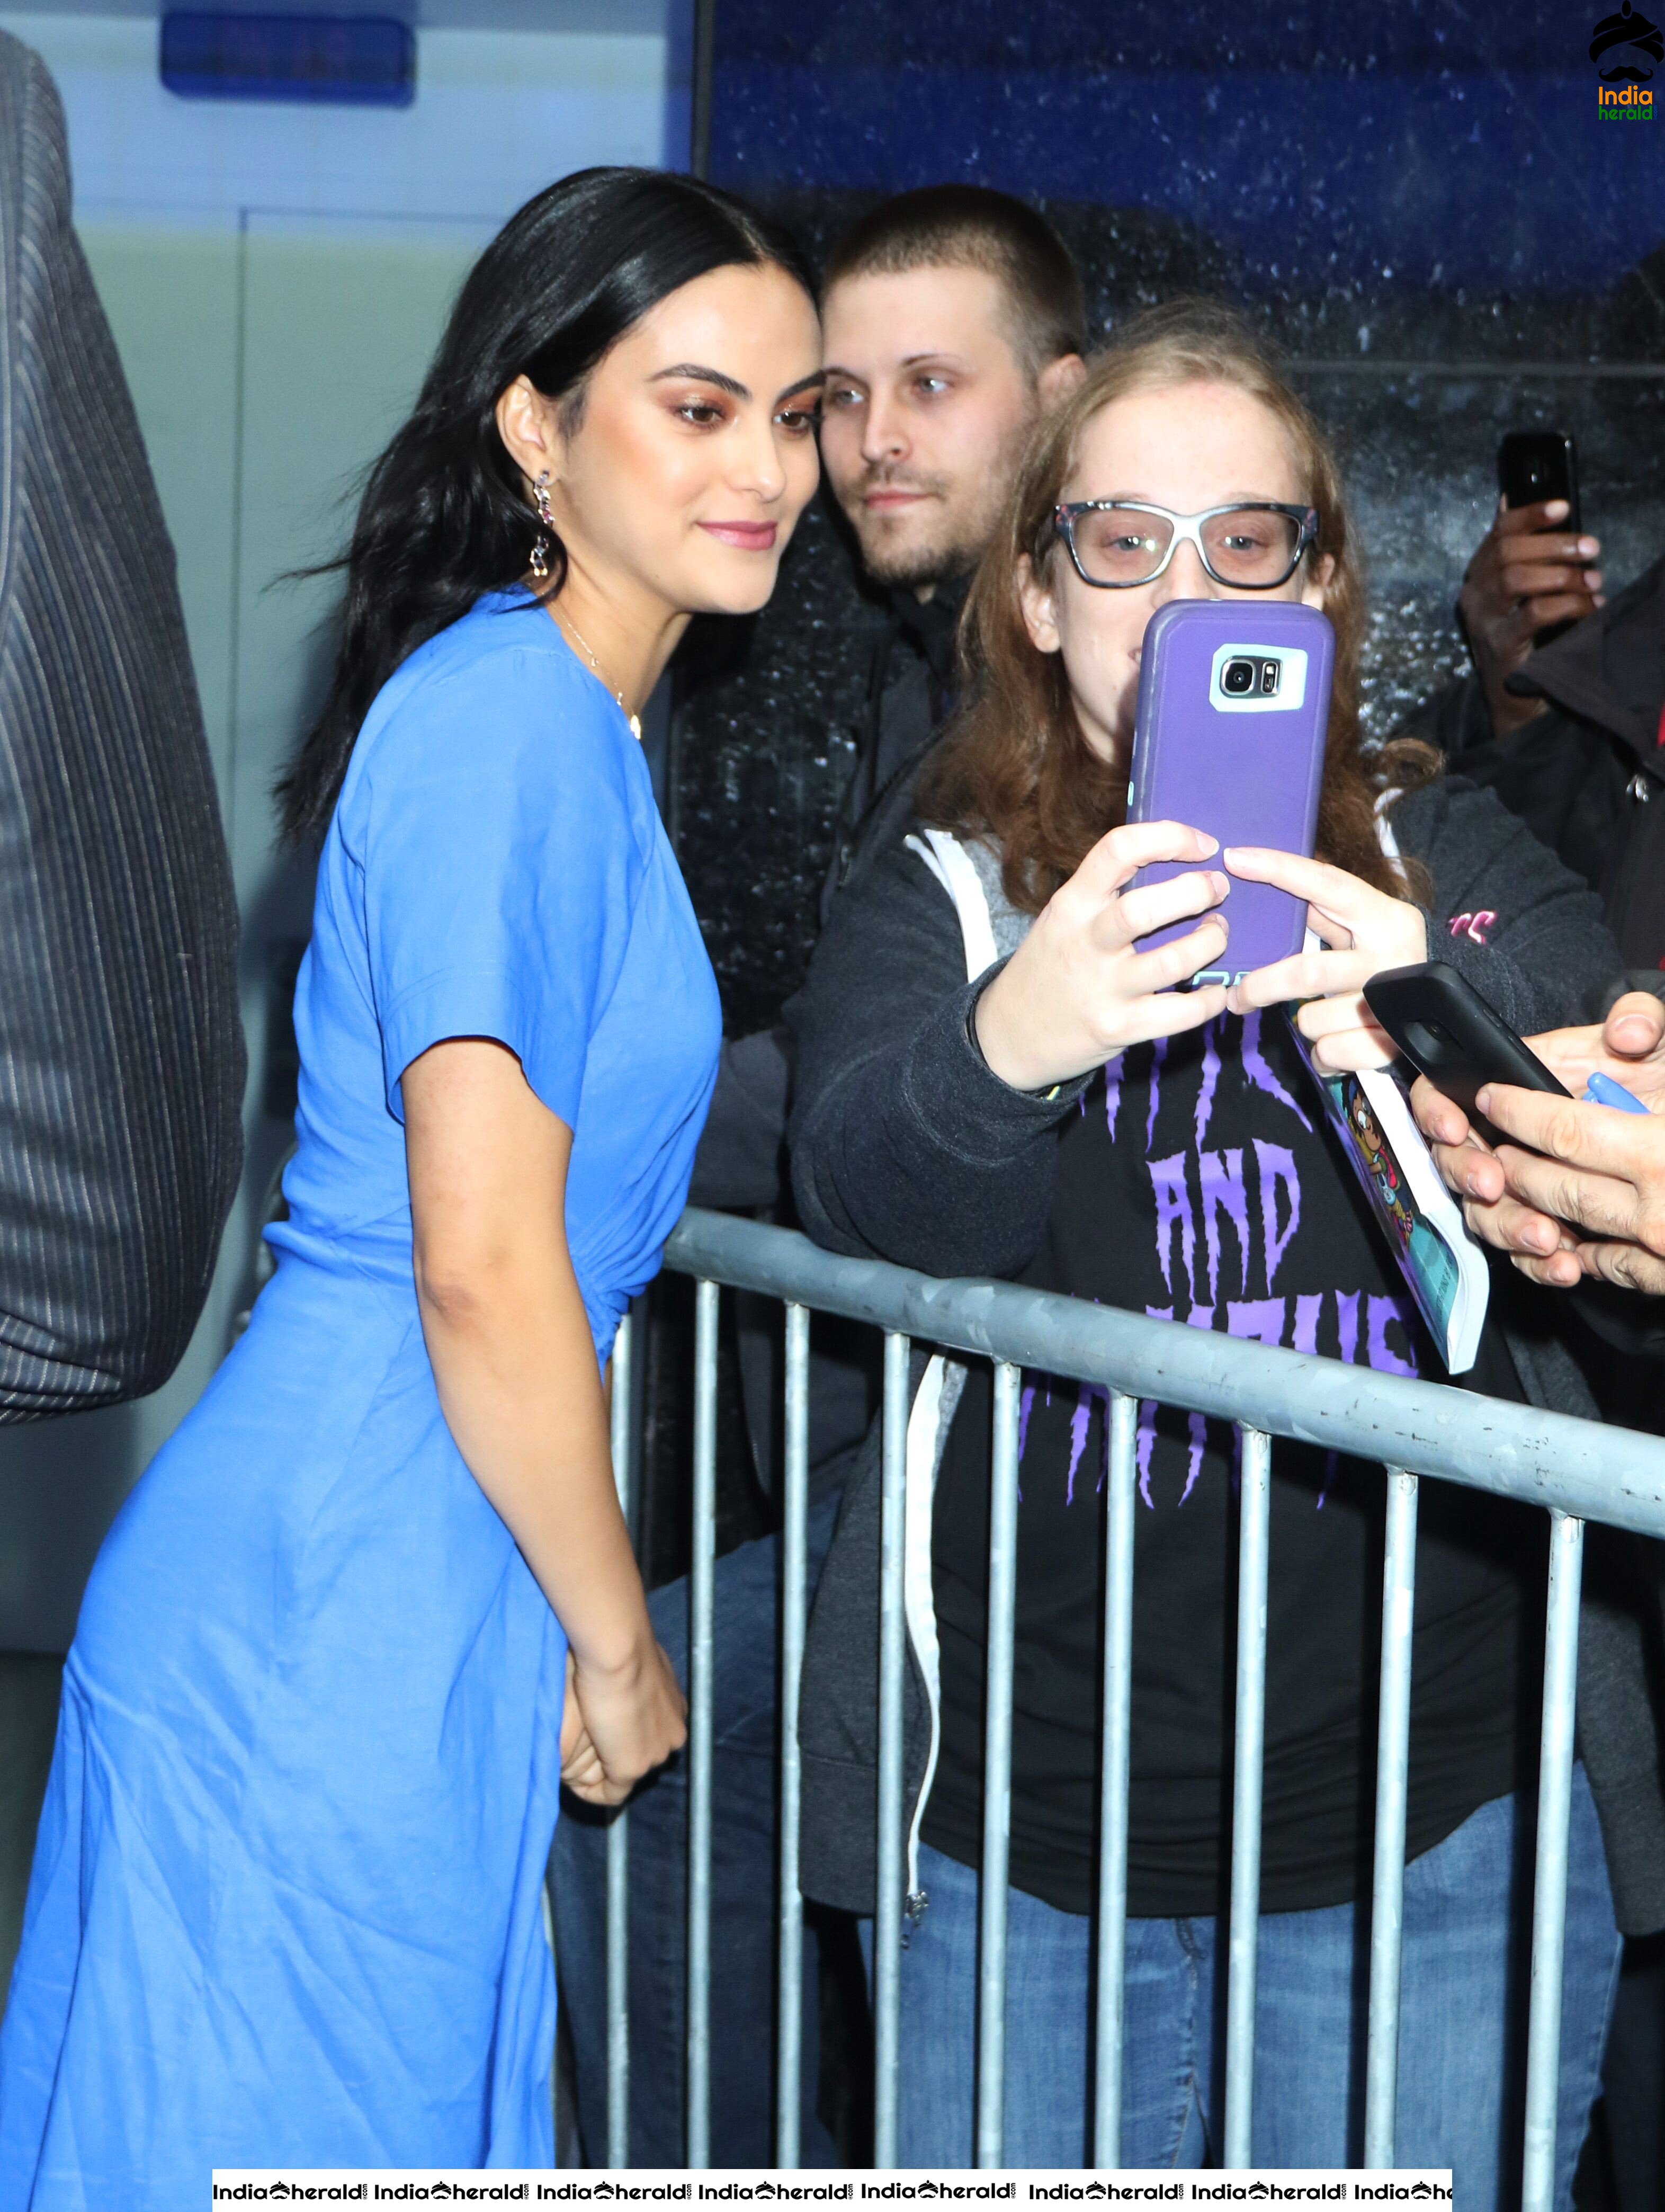 Camila Mendes On The Way to Good Morning America Show in NYC Set 2